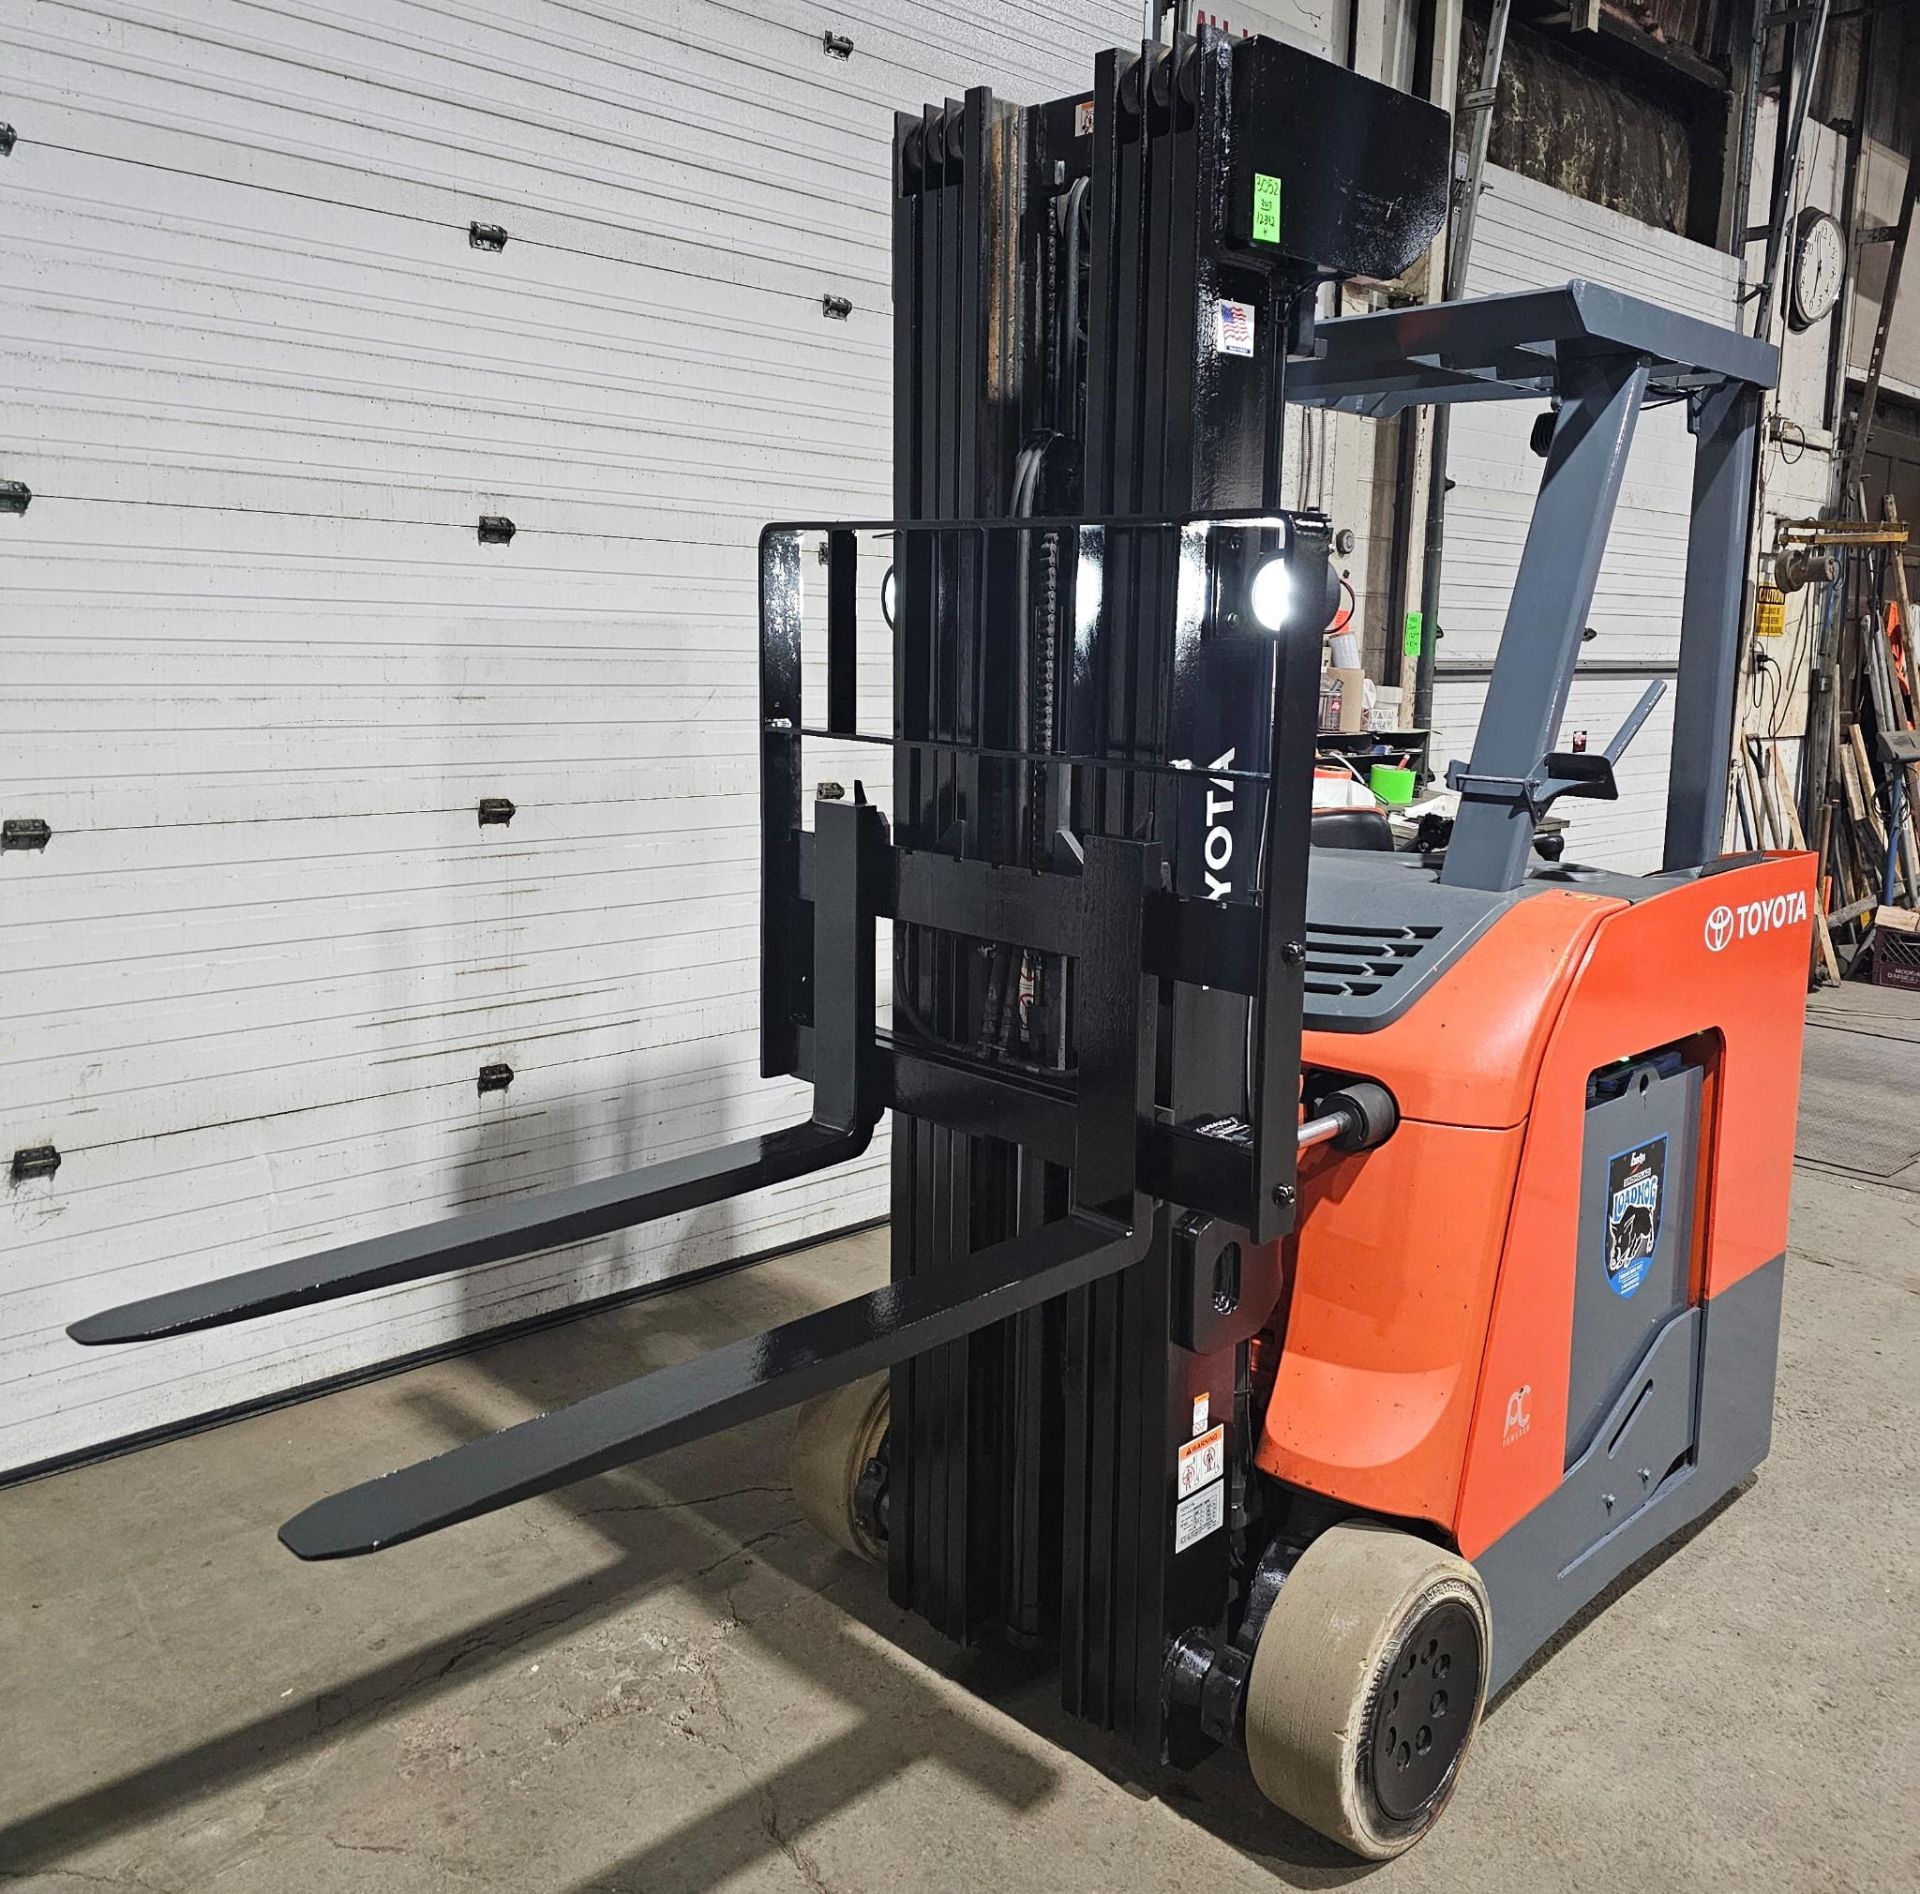 2017 Toyota 4,000lbs Capacity Forklift Electric 36V with sideshift 4-STAGE MAST 276" load height - Image 5 of 7